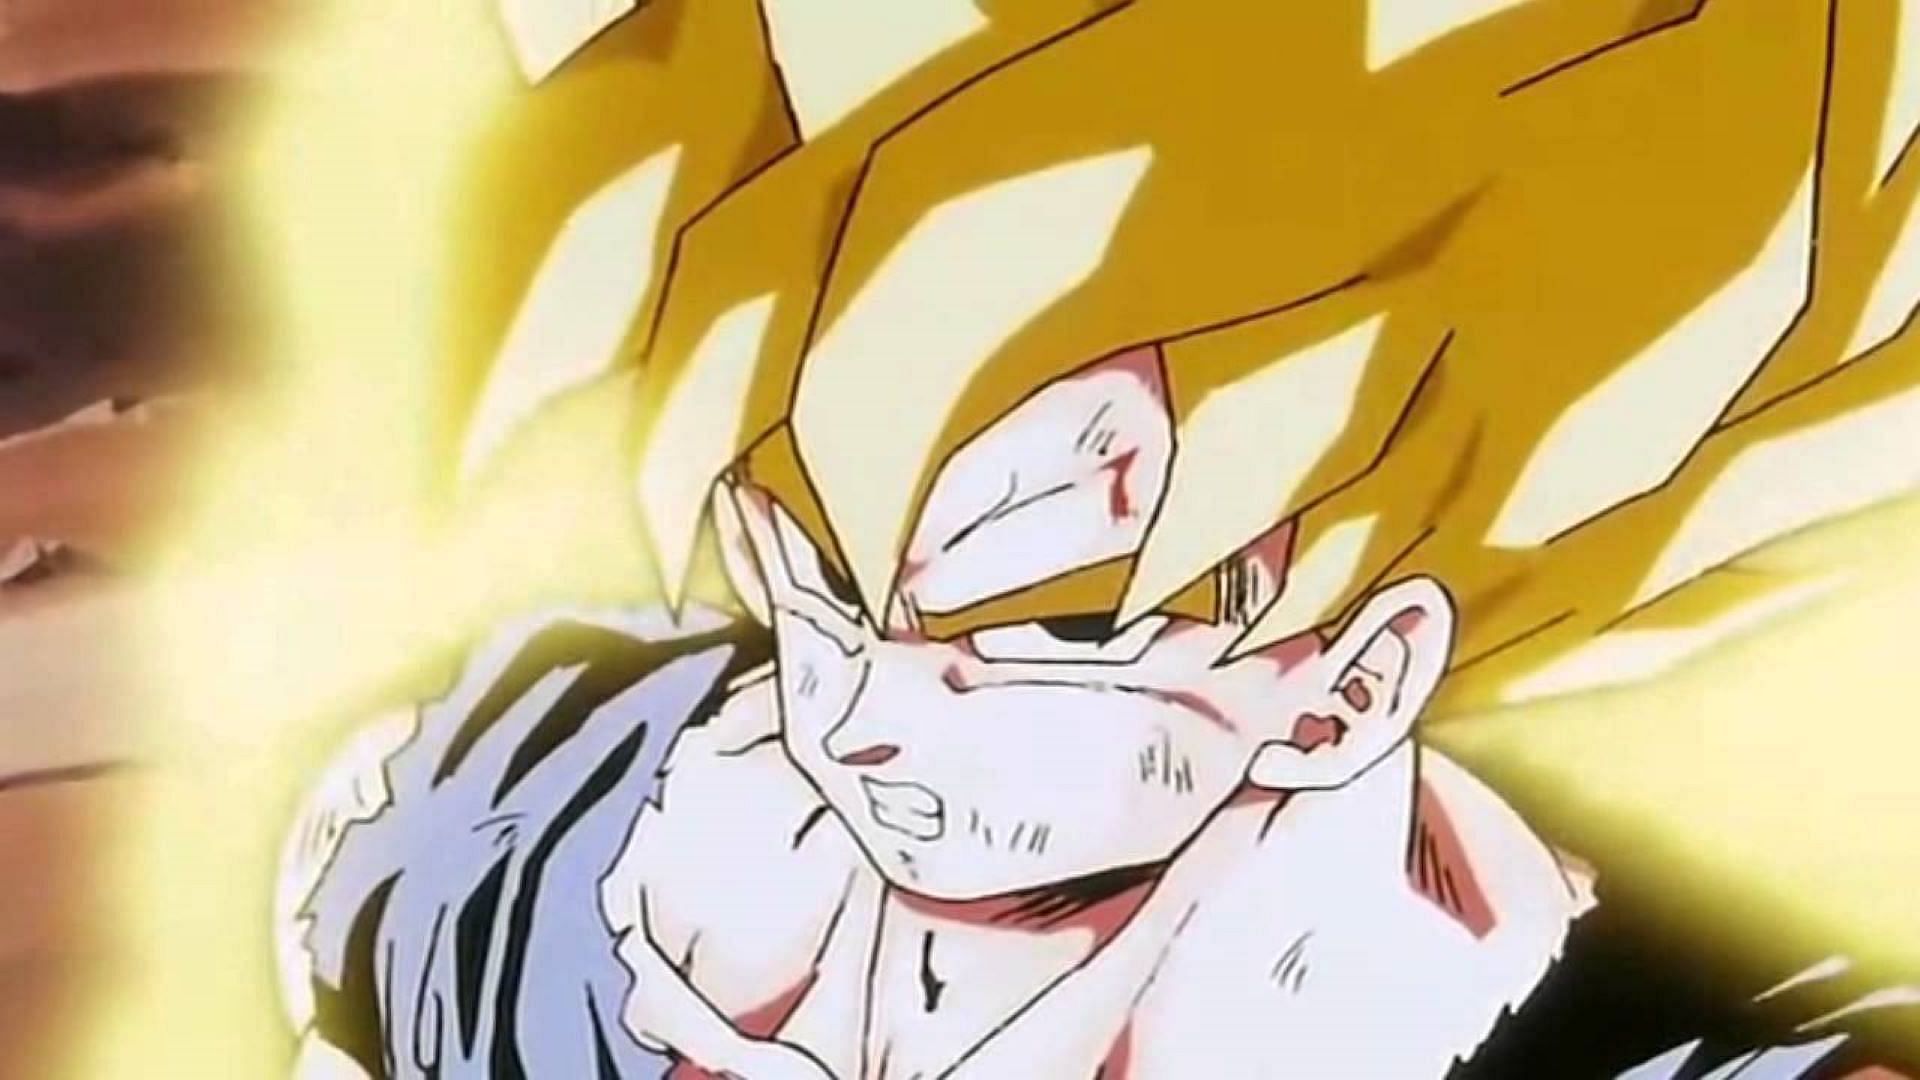 Dragon Ball: All The Super Saiyan Levels Ranked Weakest To Strongest